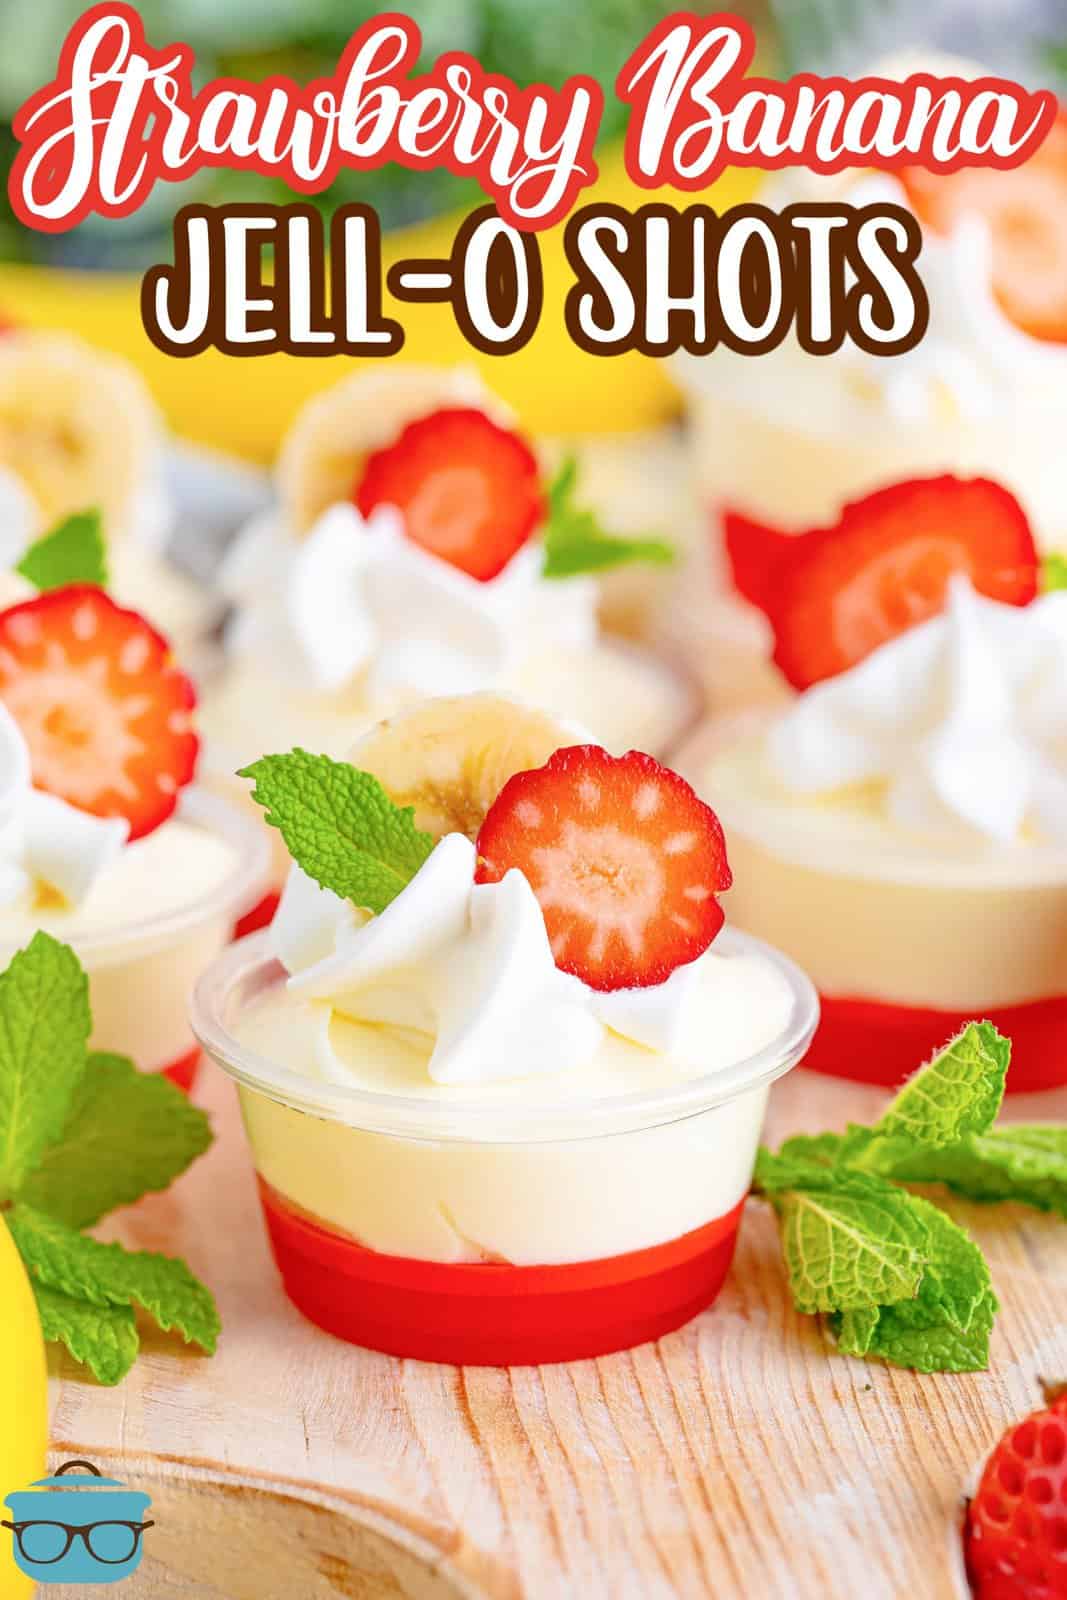 A few Strawberry Banana Jello Shots with whipped cream and strawberry slices on top.